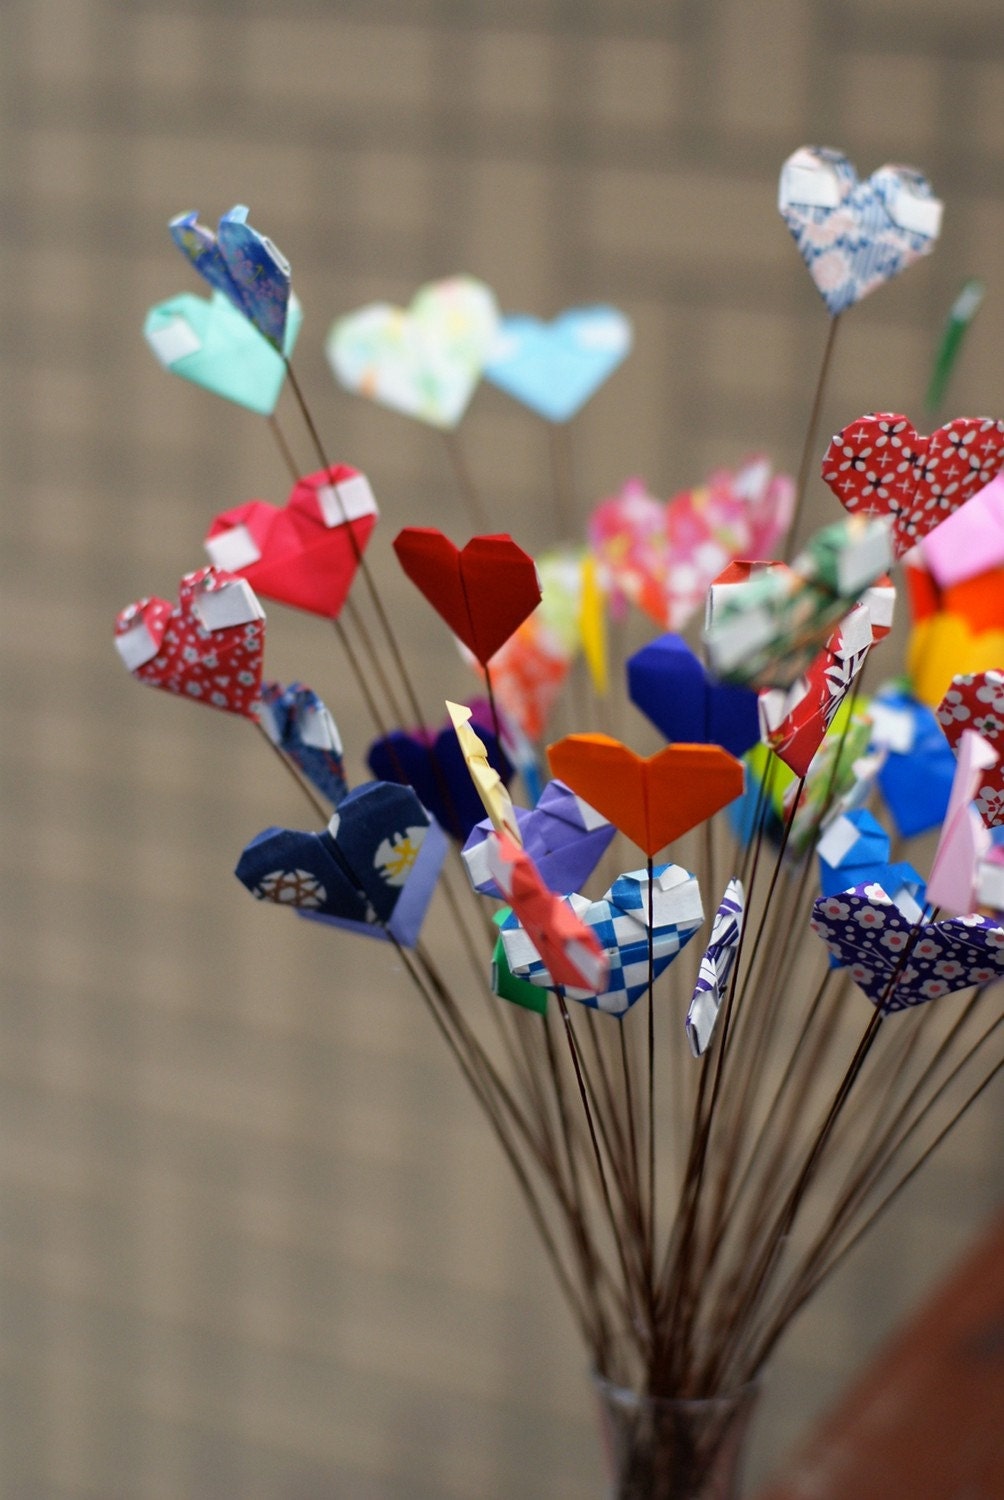 I Heart You - Origami Hearts Bouquet